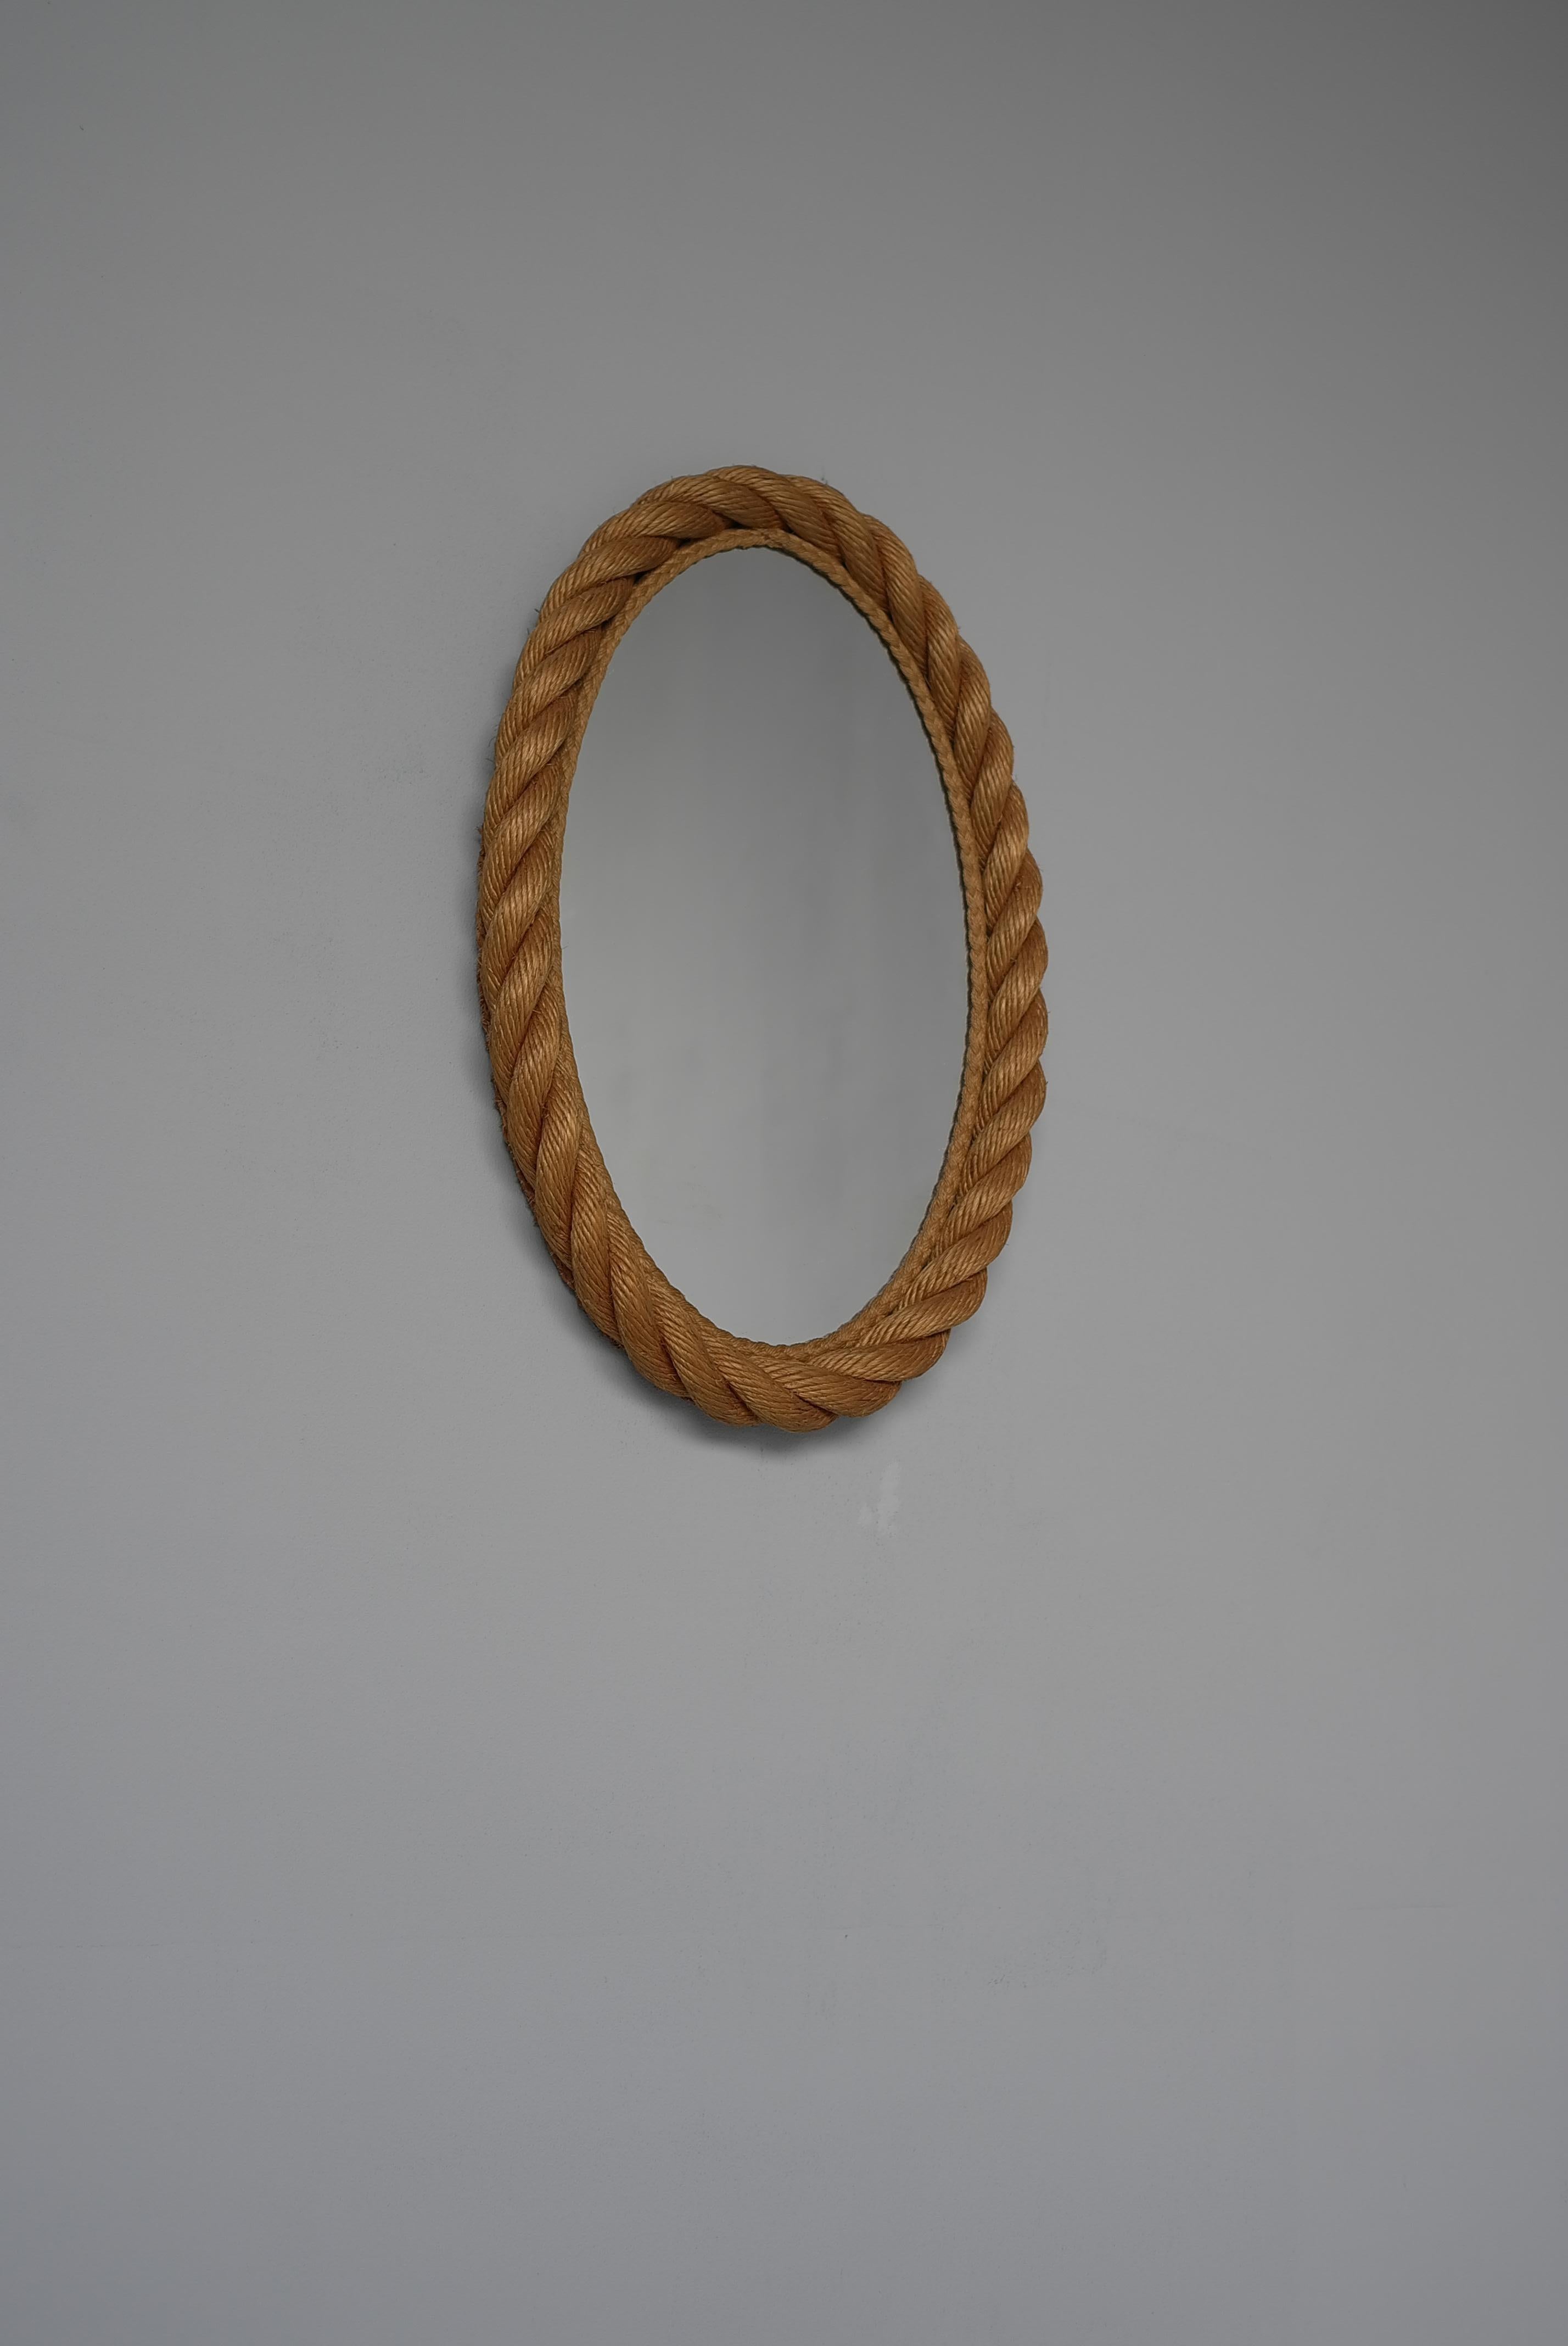 French Oval Rope Mirror by Adrien Audoux and Frida Minet, France, 1950s For Sale